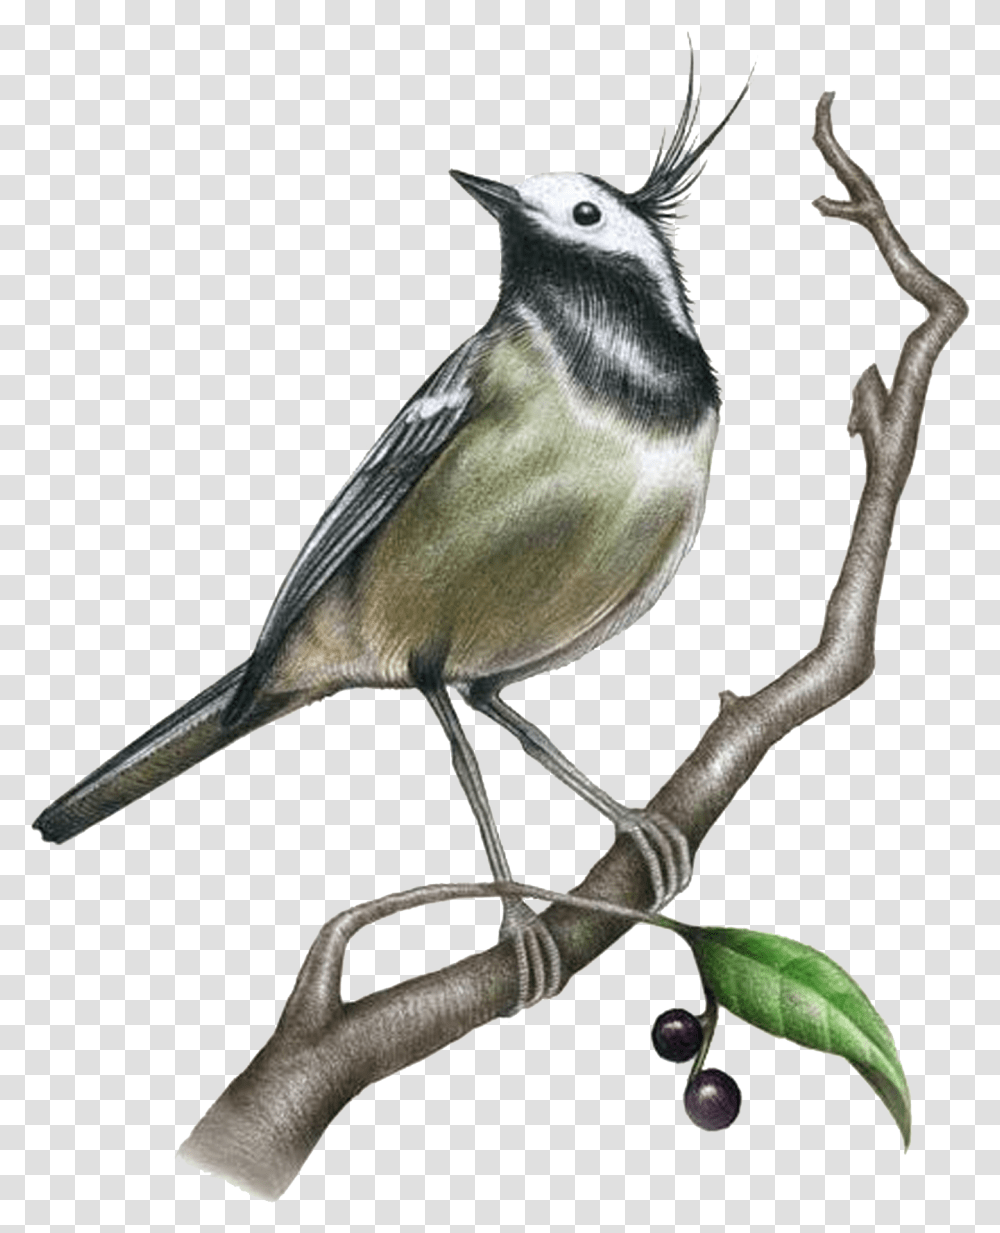 Drawing Painting Bird Illustration Realistic Sketch Drawings Of Birds Animal Jay Finch Blue Jay Transparent Png Pngset Com